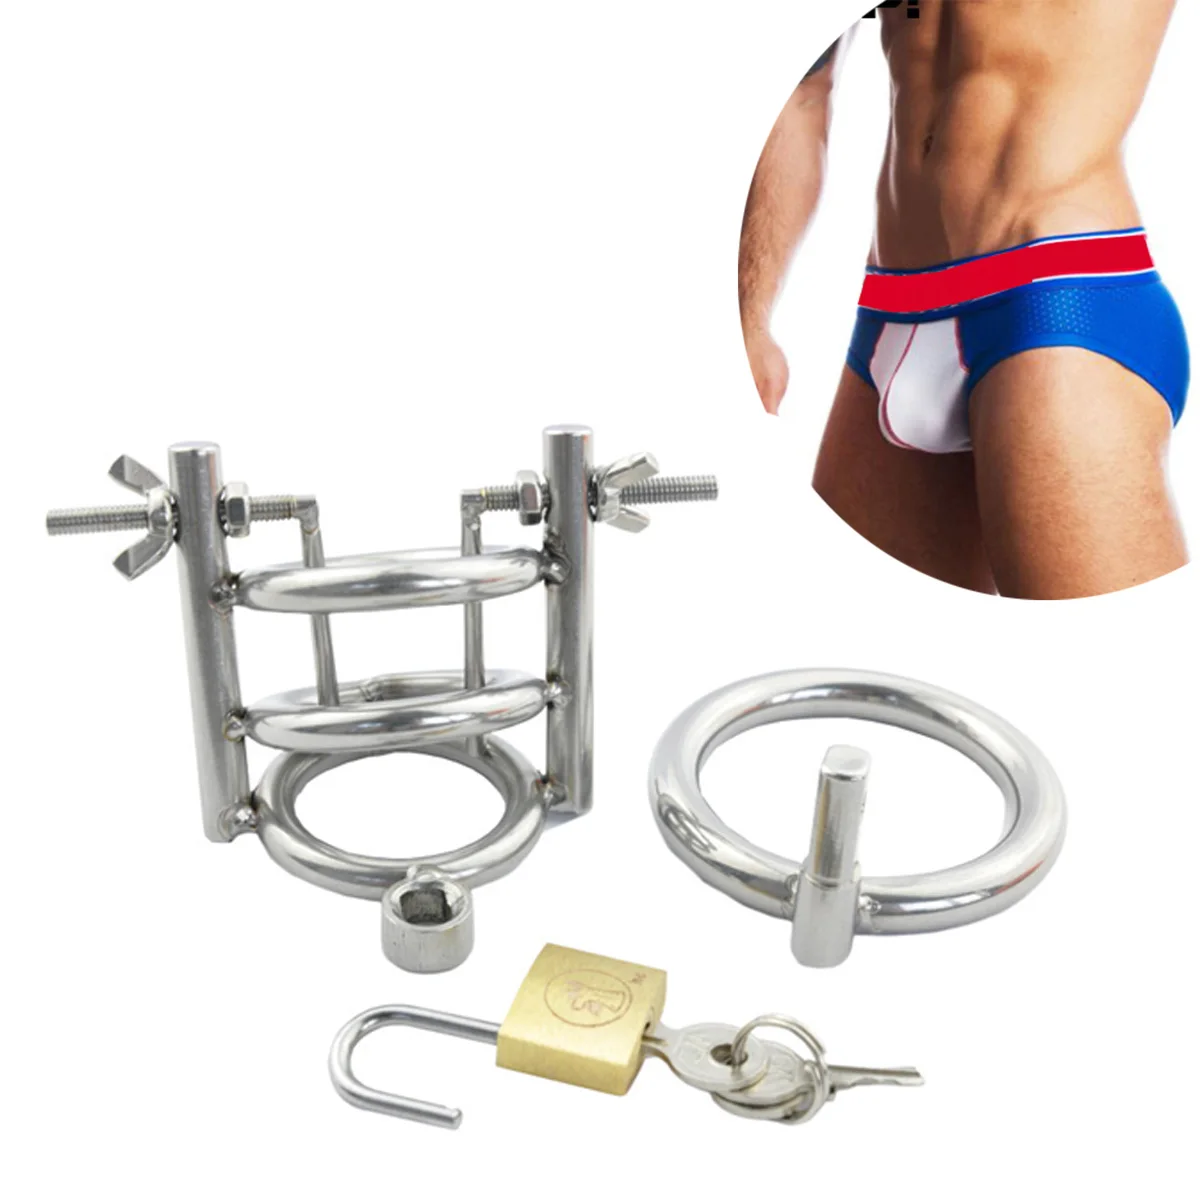 

New 304 Stainless Steel Stealth Lock Male Chastity Device Belt Penis Cage Cock Ring With Urethral Catheter Sounding BDSM Toys